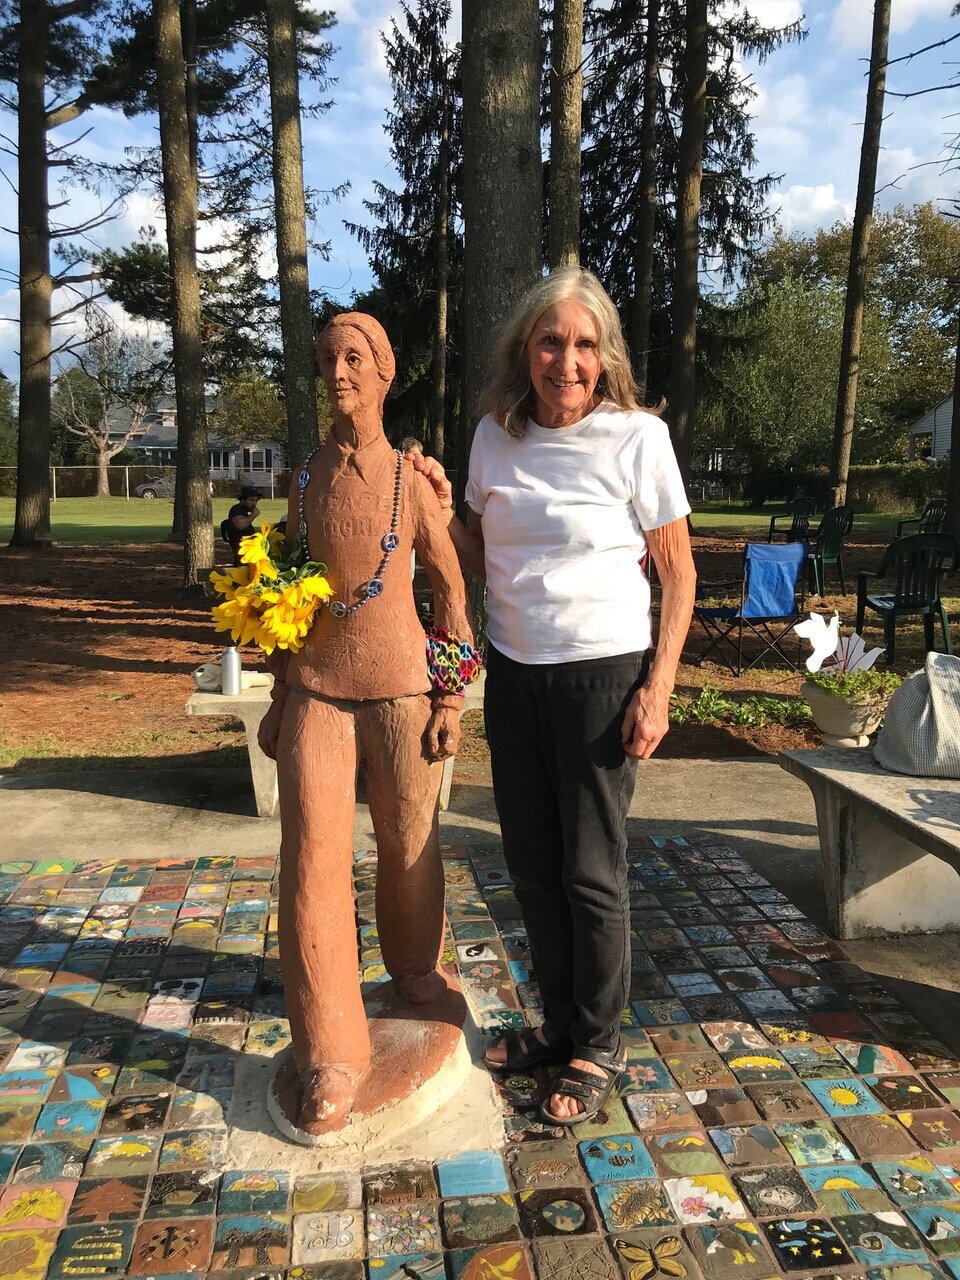  Sculptor Sally Laird McInerney poses by her beautiful Peace Pilgrim likeness, which was re-installed just in time for the celebration after she repaired it from extensive damage caused during a storm when a tree fell on it.  